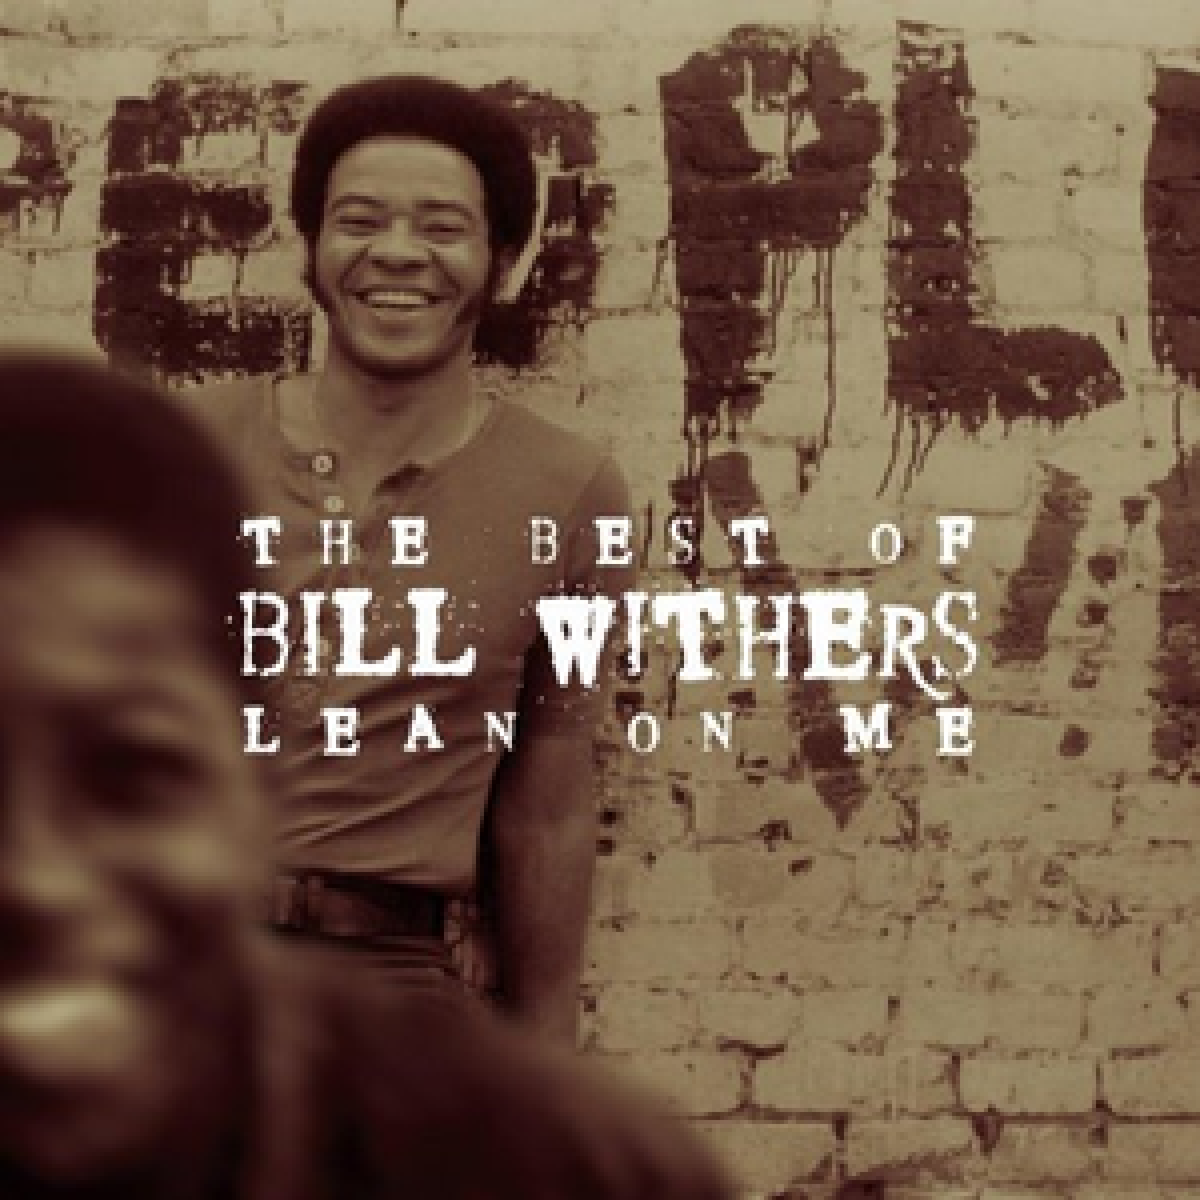 #NowPlaying Bill Withers - Just the two of us https://t.co/jOVBcrSXzW